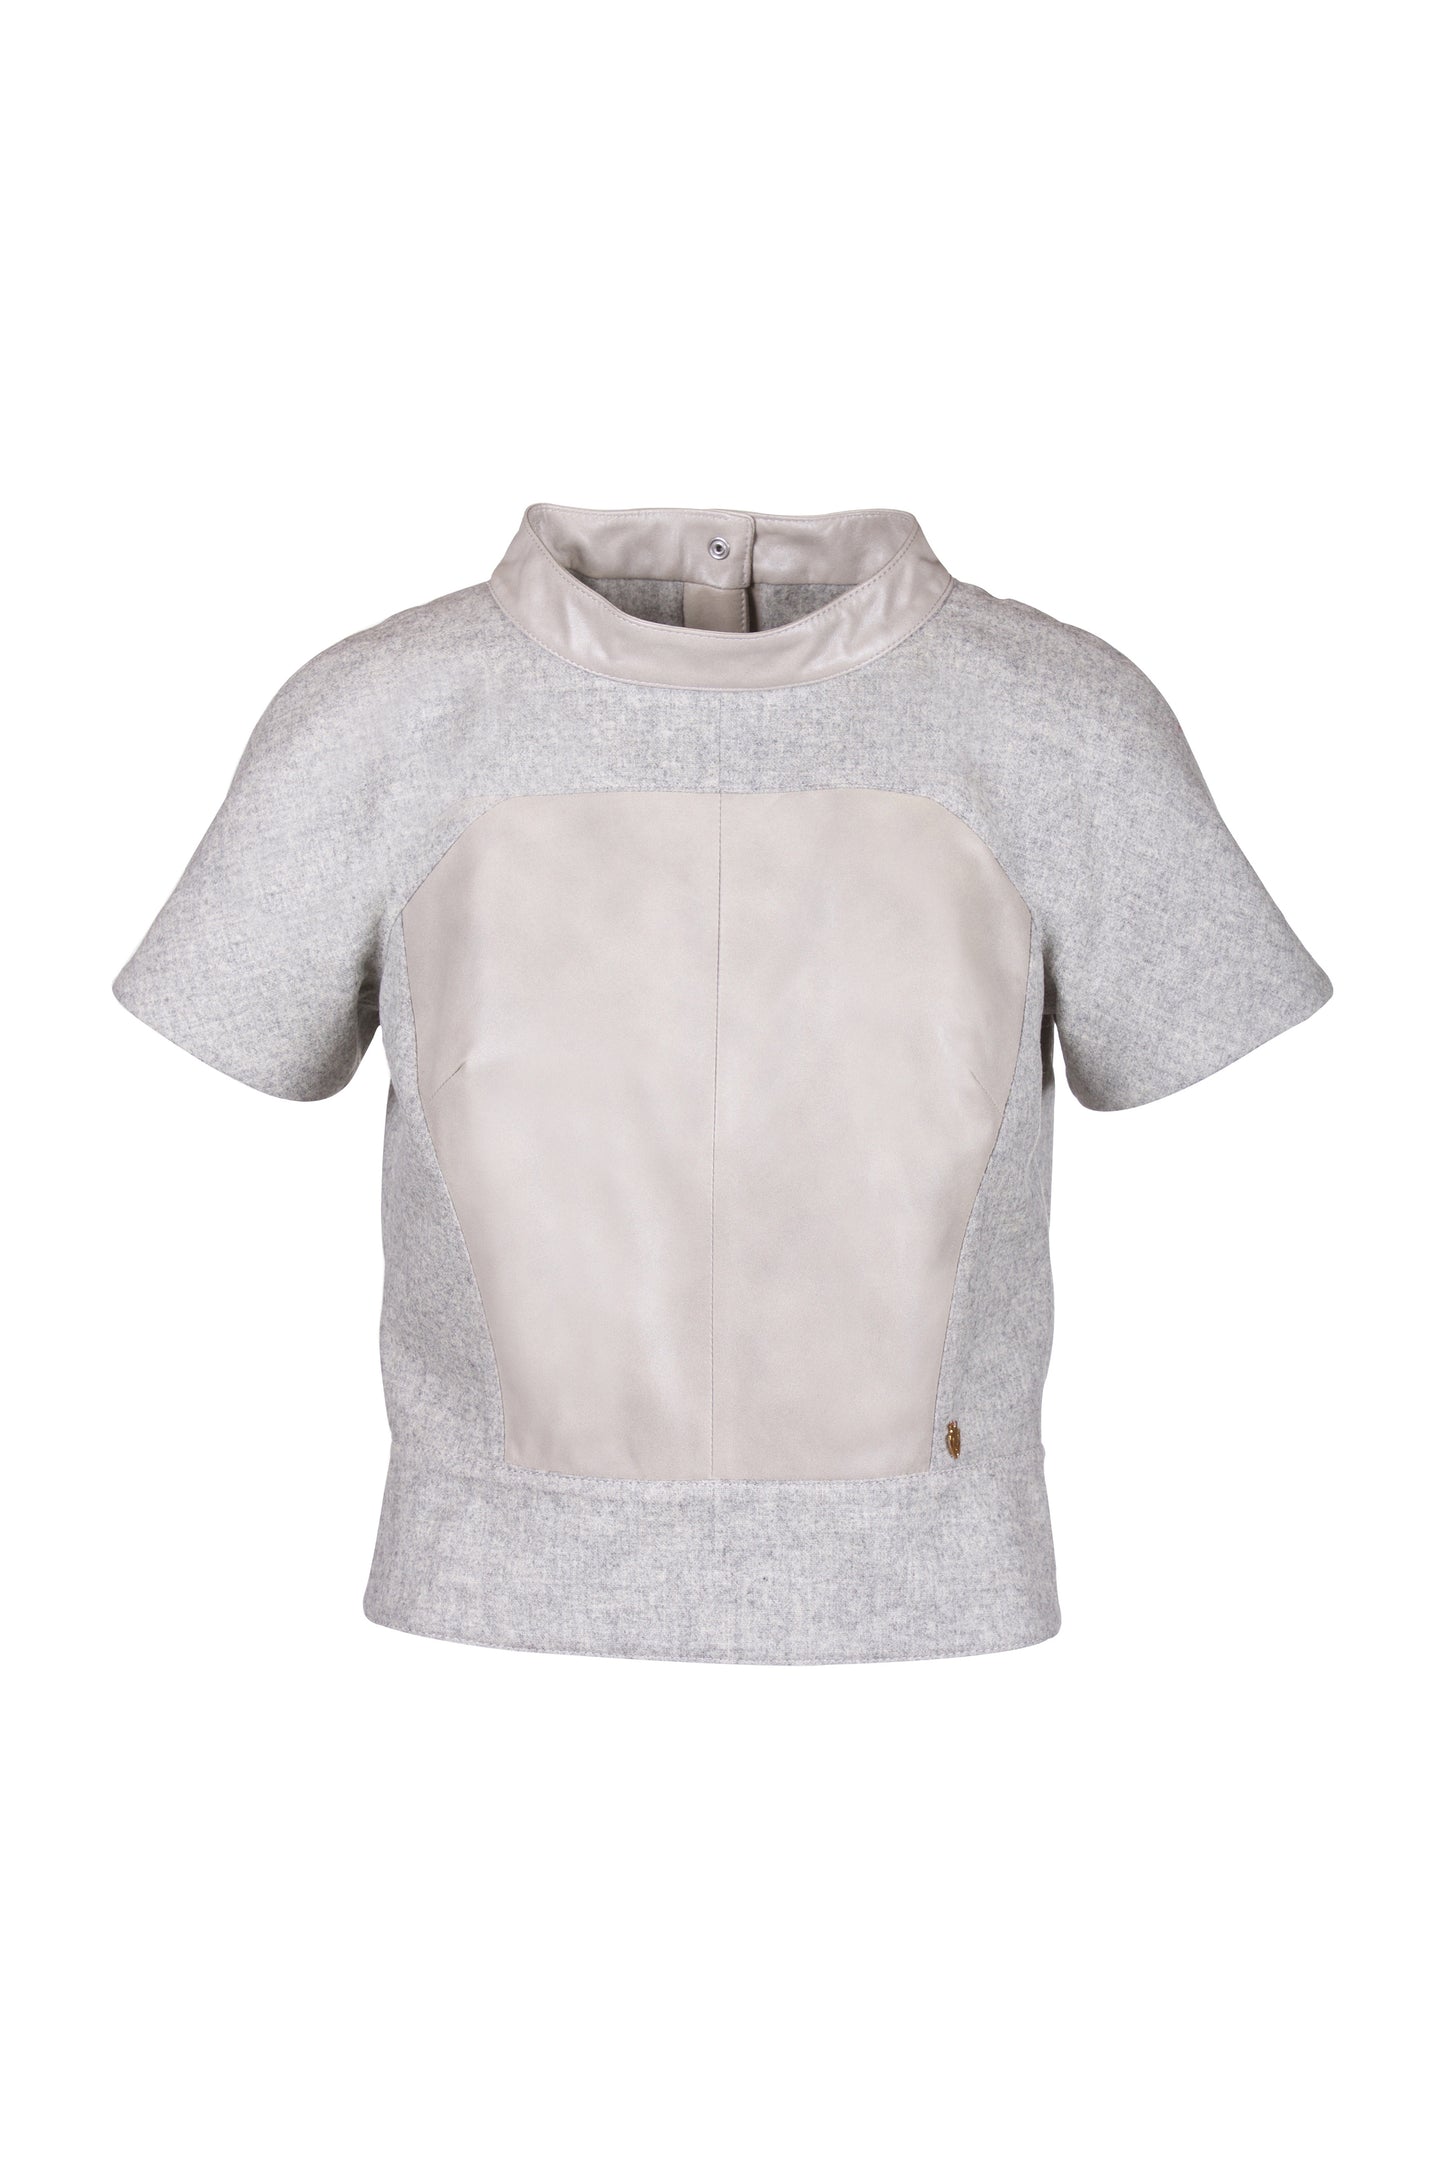 Merino Wool Reindeer Leather Blouse -  Limited Edition